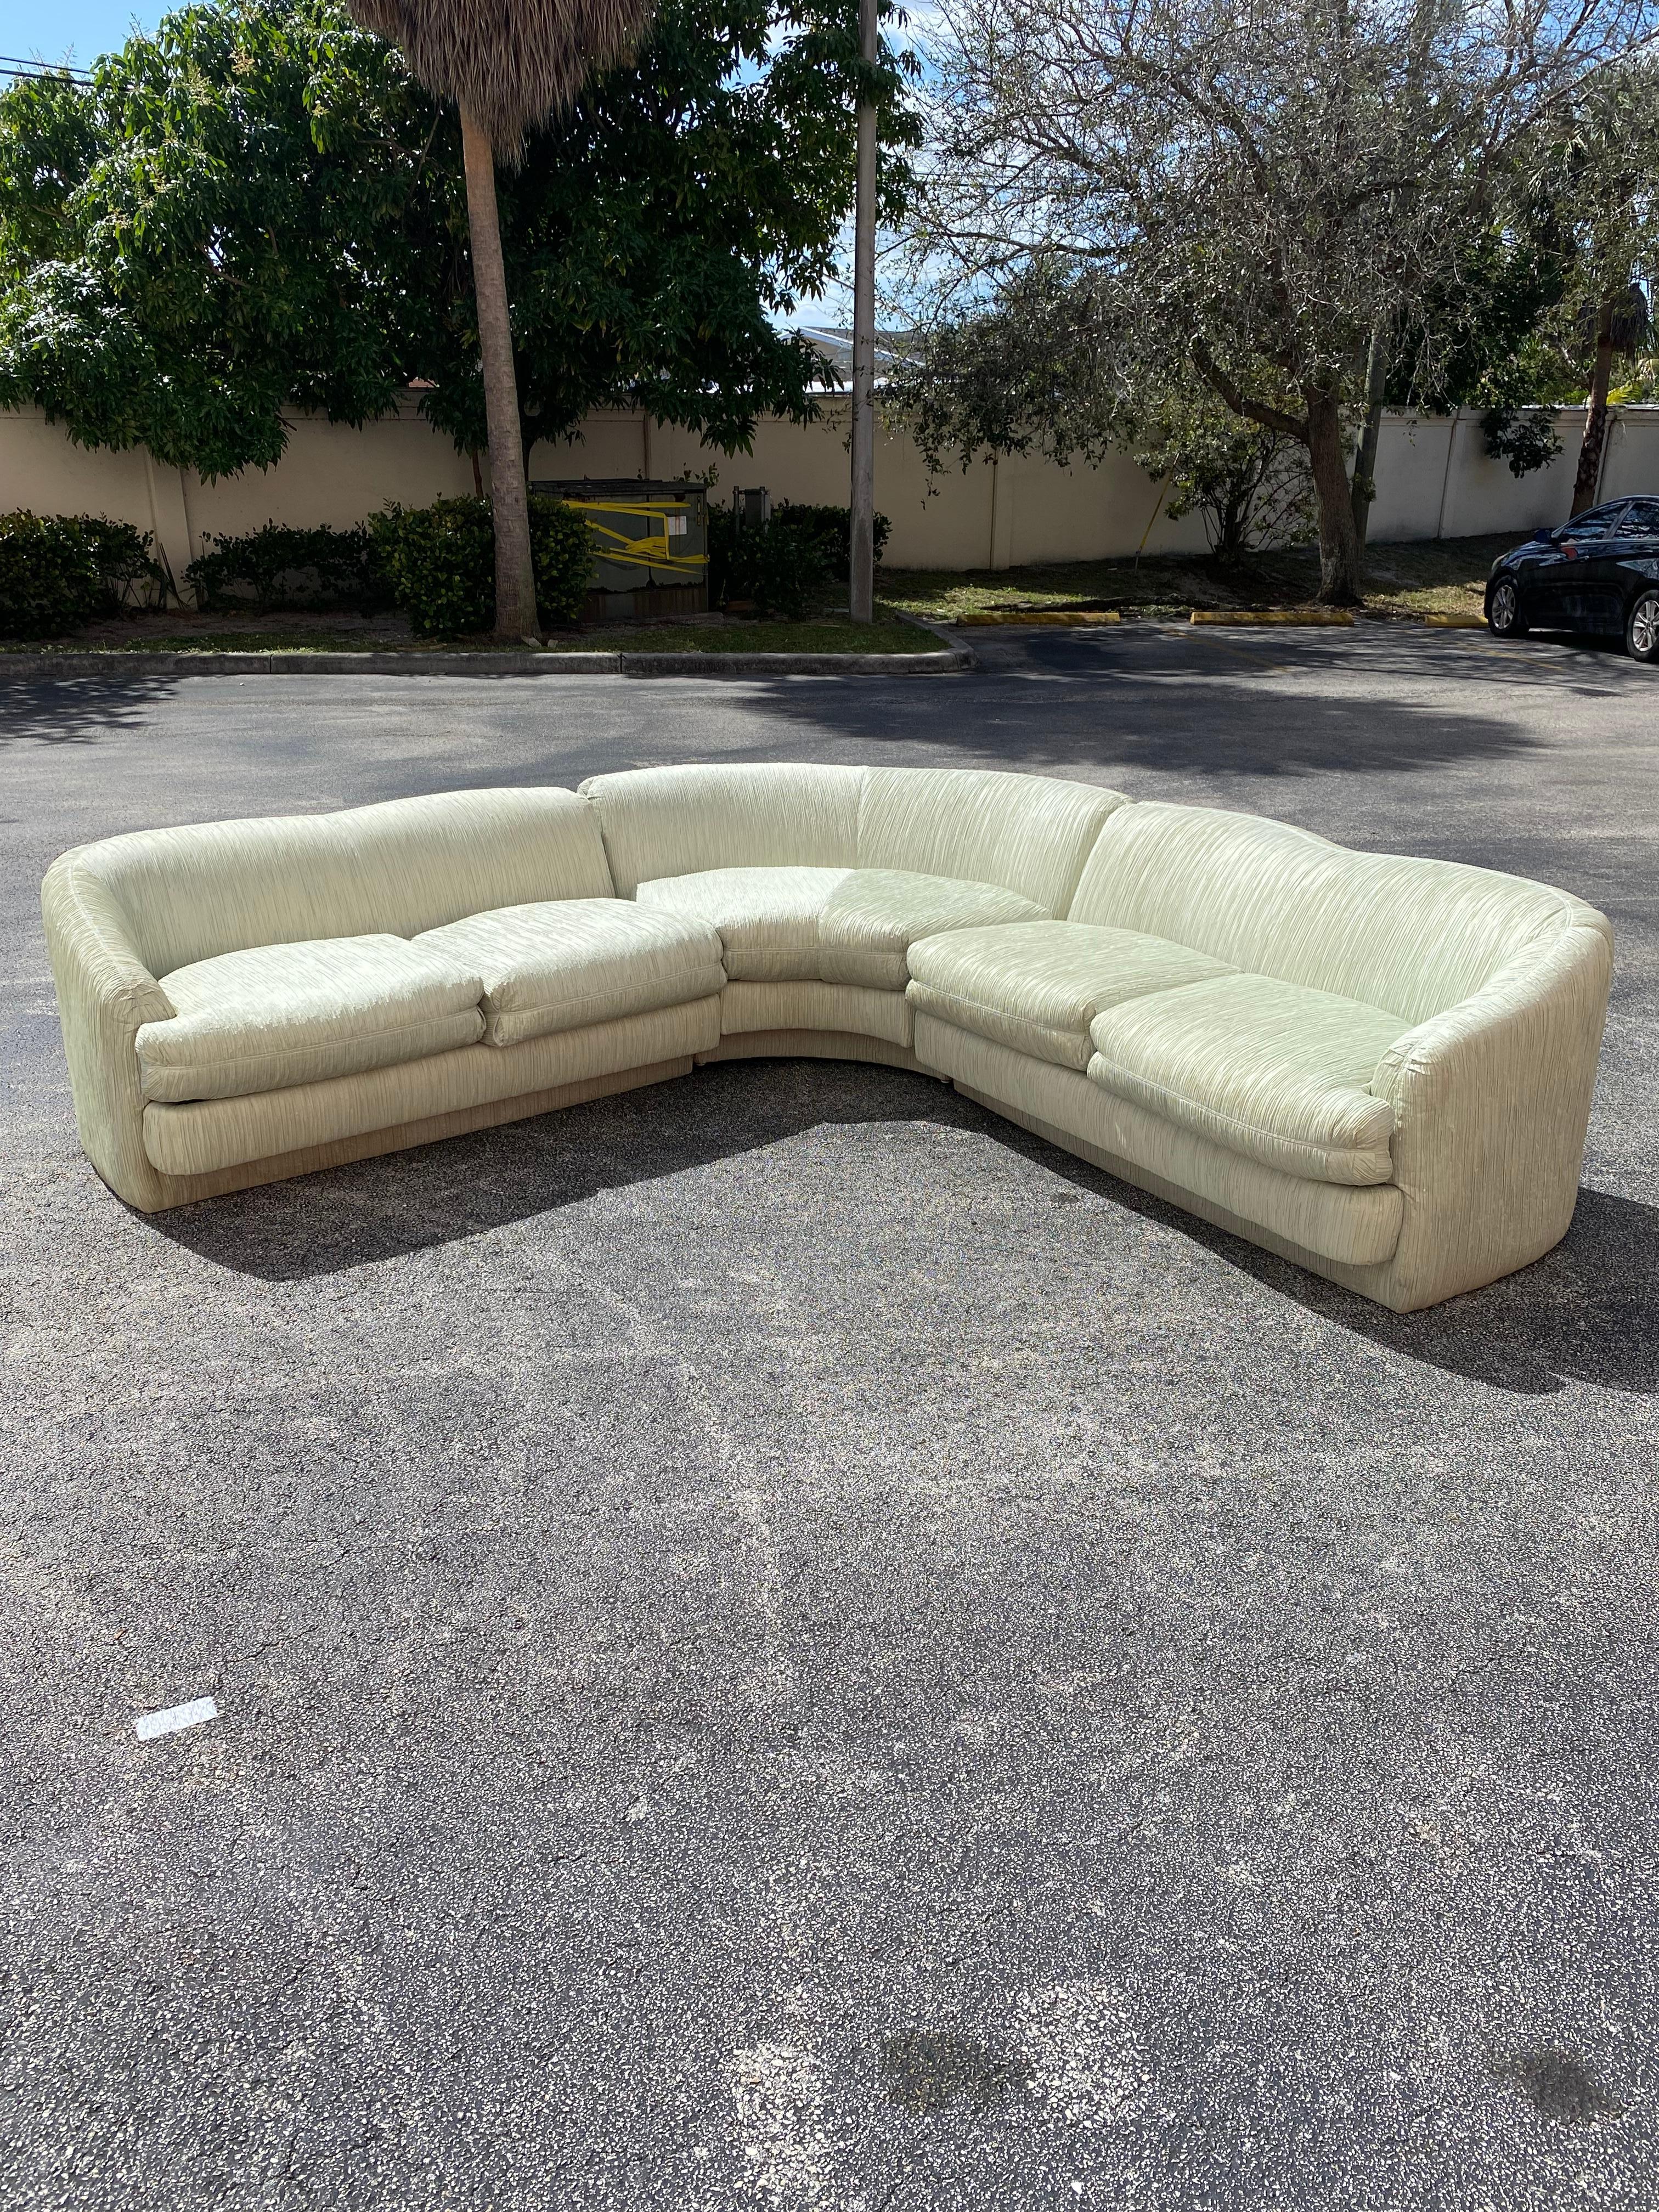 1980s Weiman Curved Sculptural Pleated Mint Green Sectional In Good Condition For Sale In Fort Lauderdale, FL